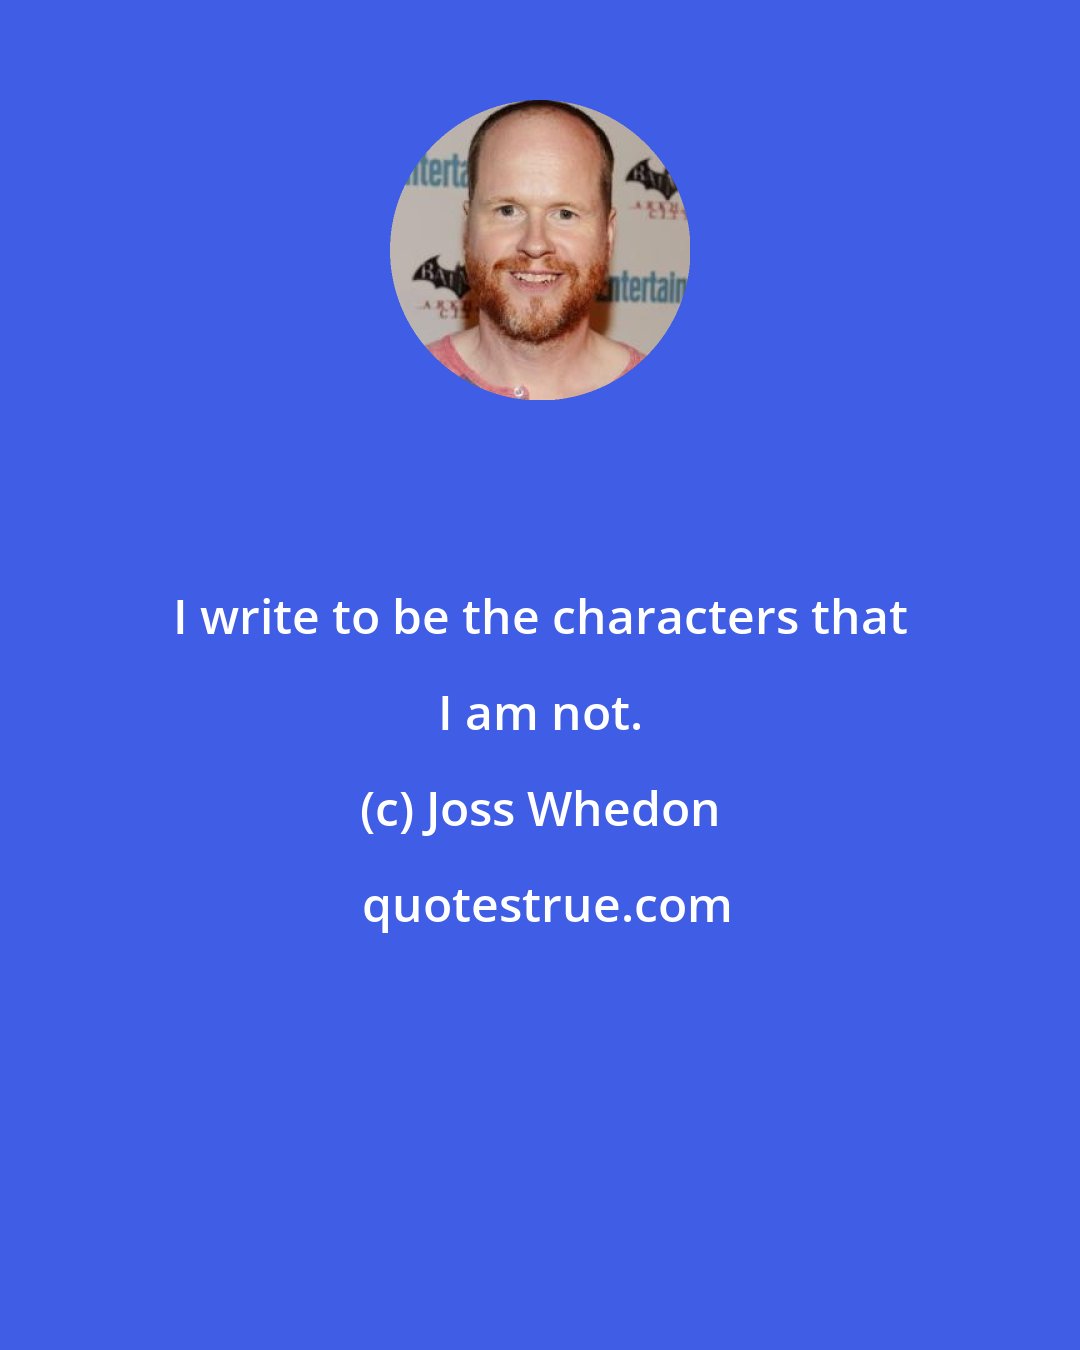 Joss Whedon: I write to be the characters that I am not.